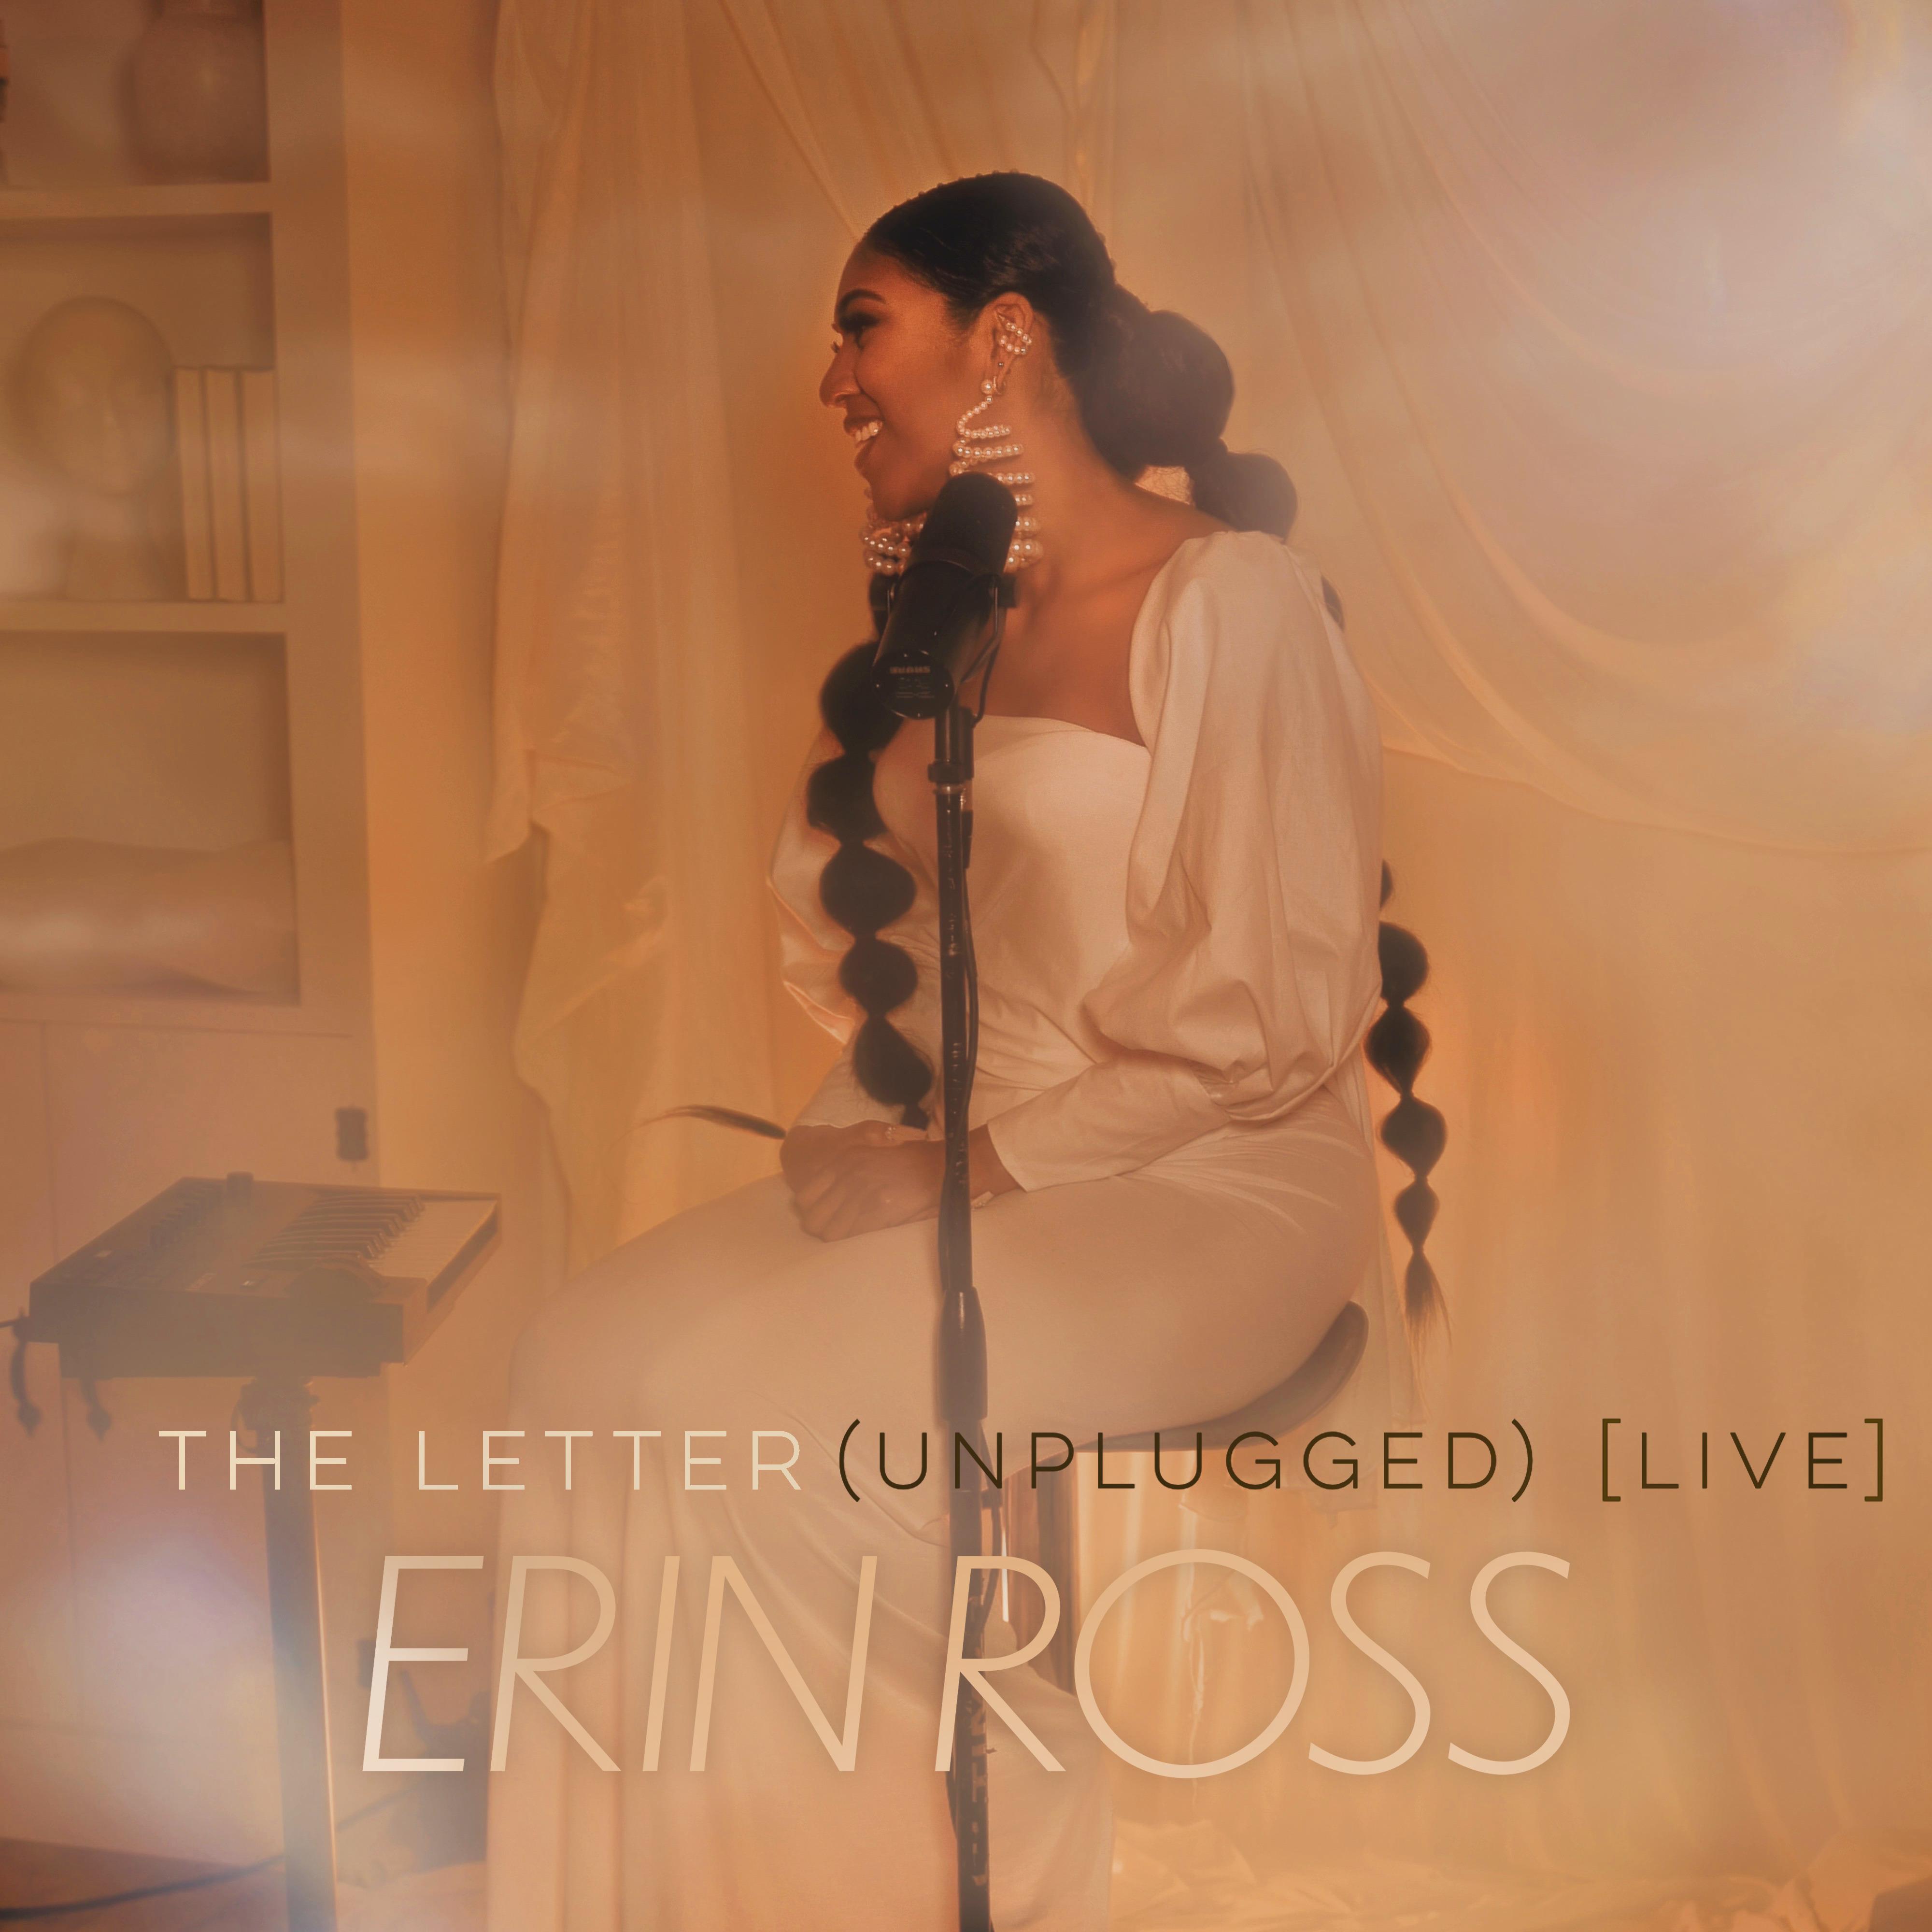 Erin Ross - The Letter (Unplugged) [Live]